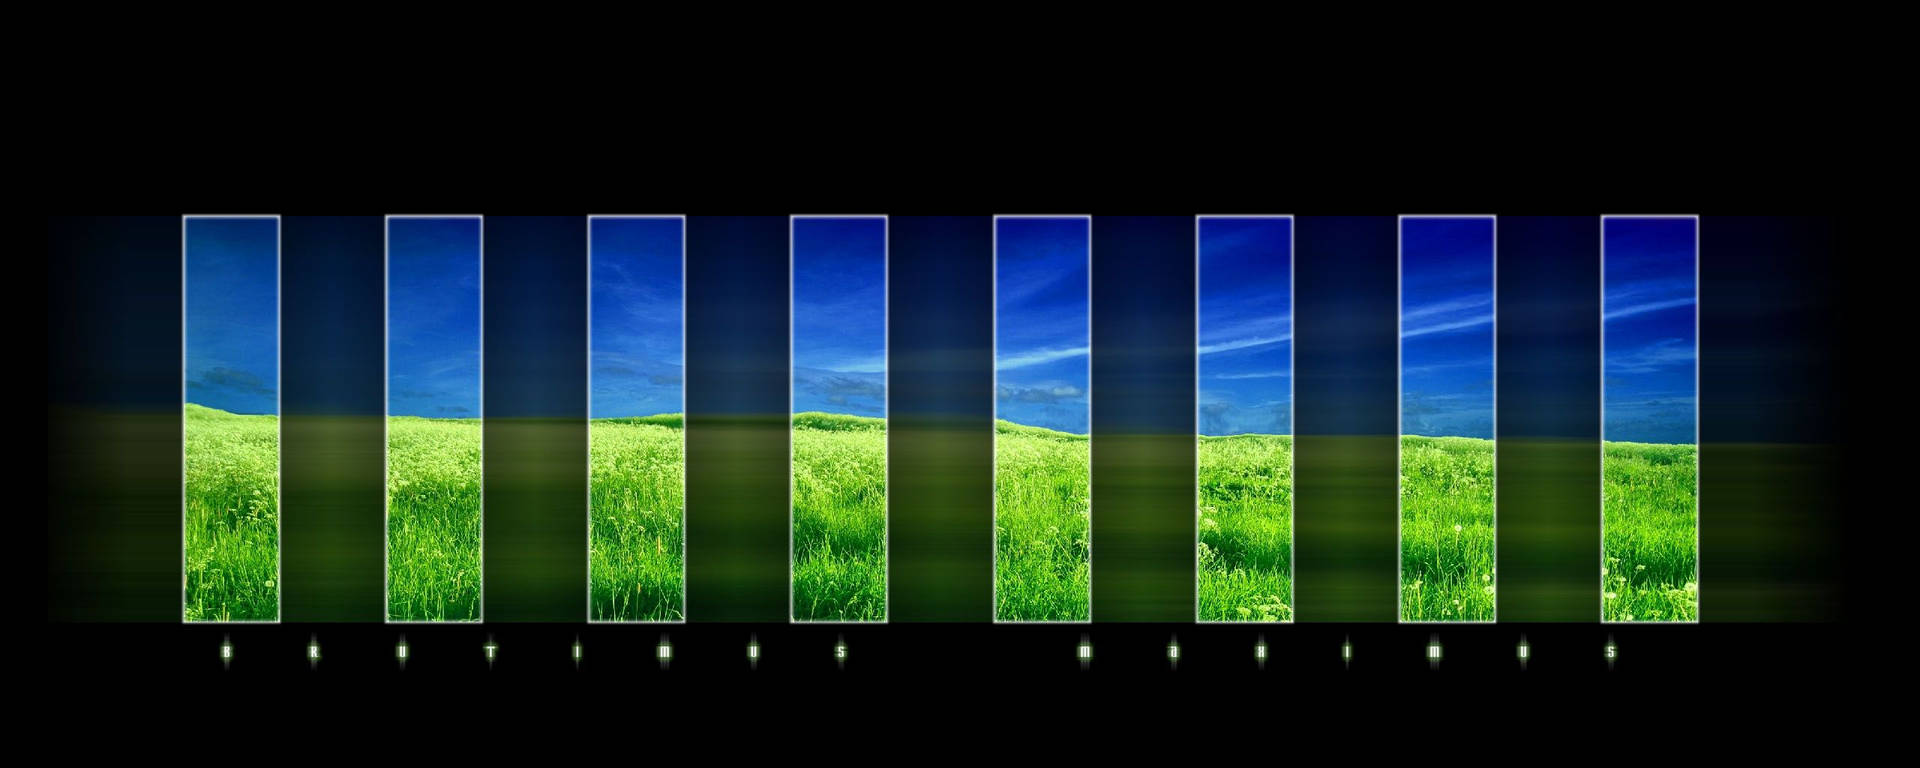 A Black Screen With Green Grass And Blue Sky Wallpaper